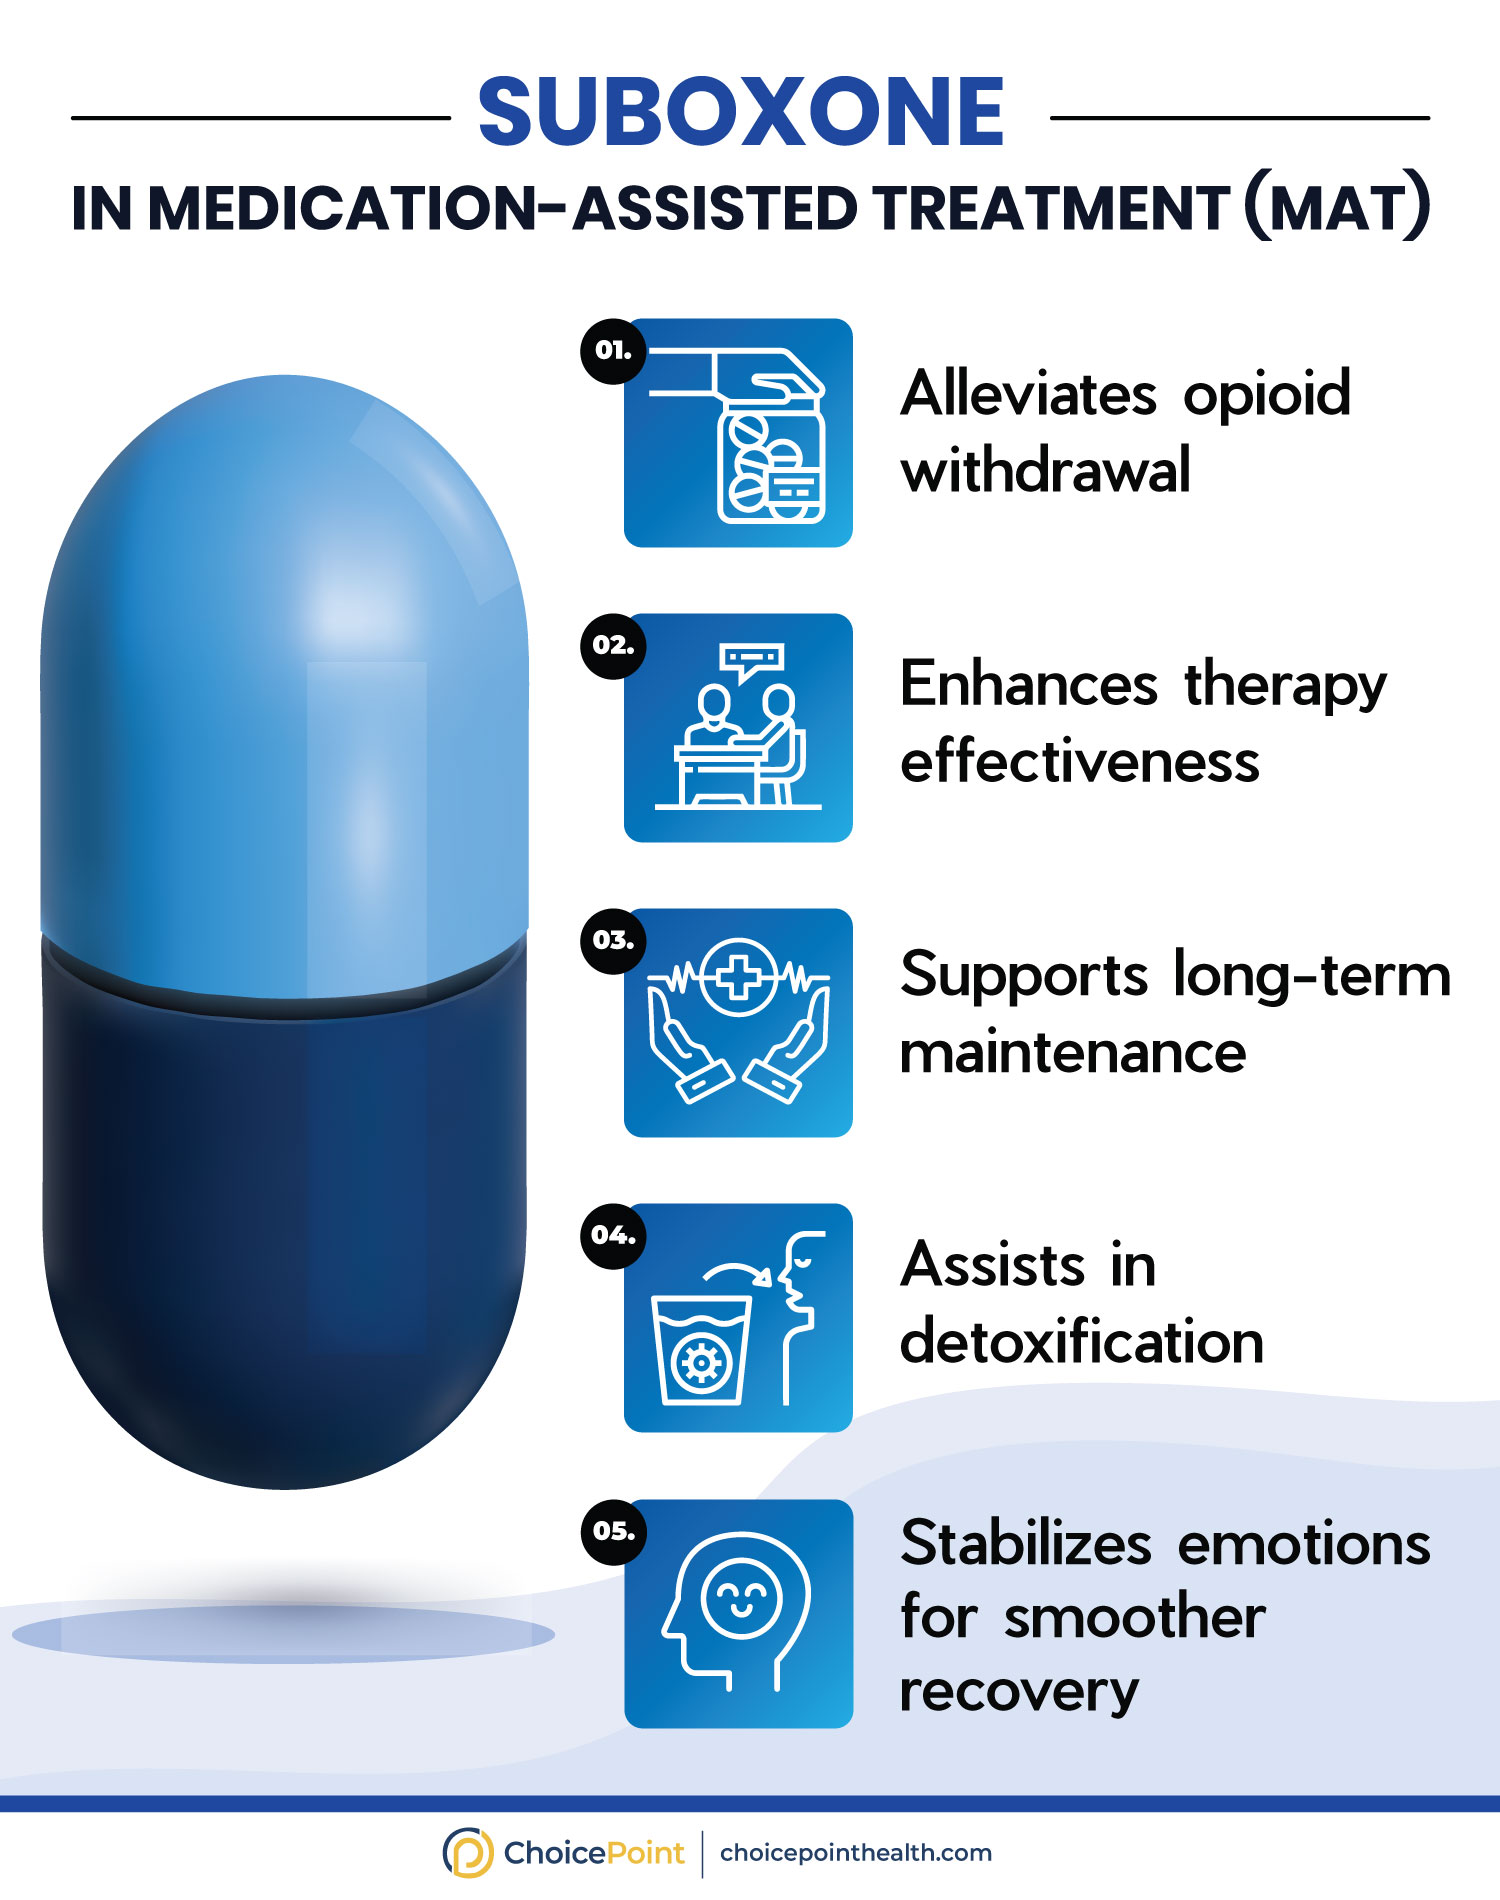 Effectiveness of Suboxone in Medication-Assisted Treatment (MAT)